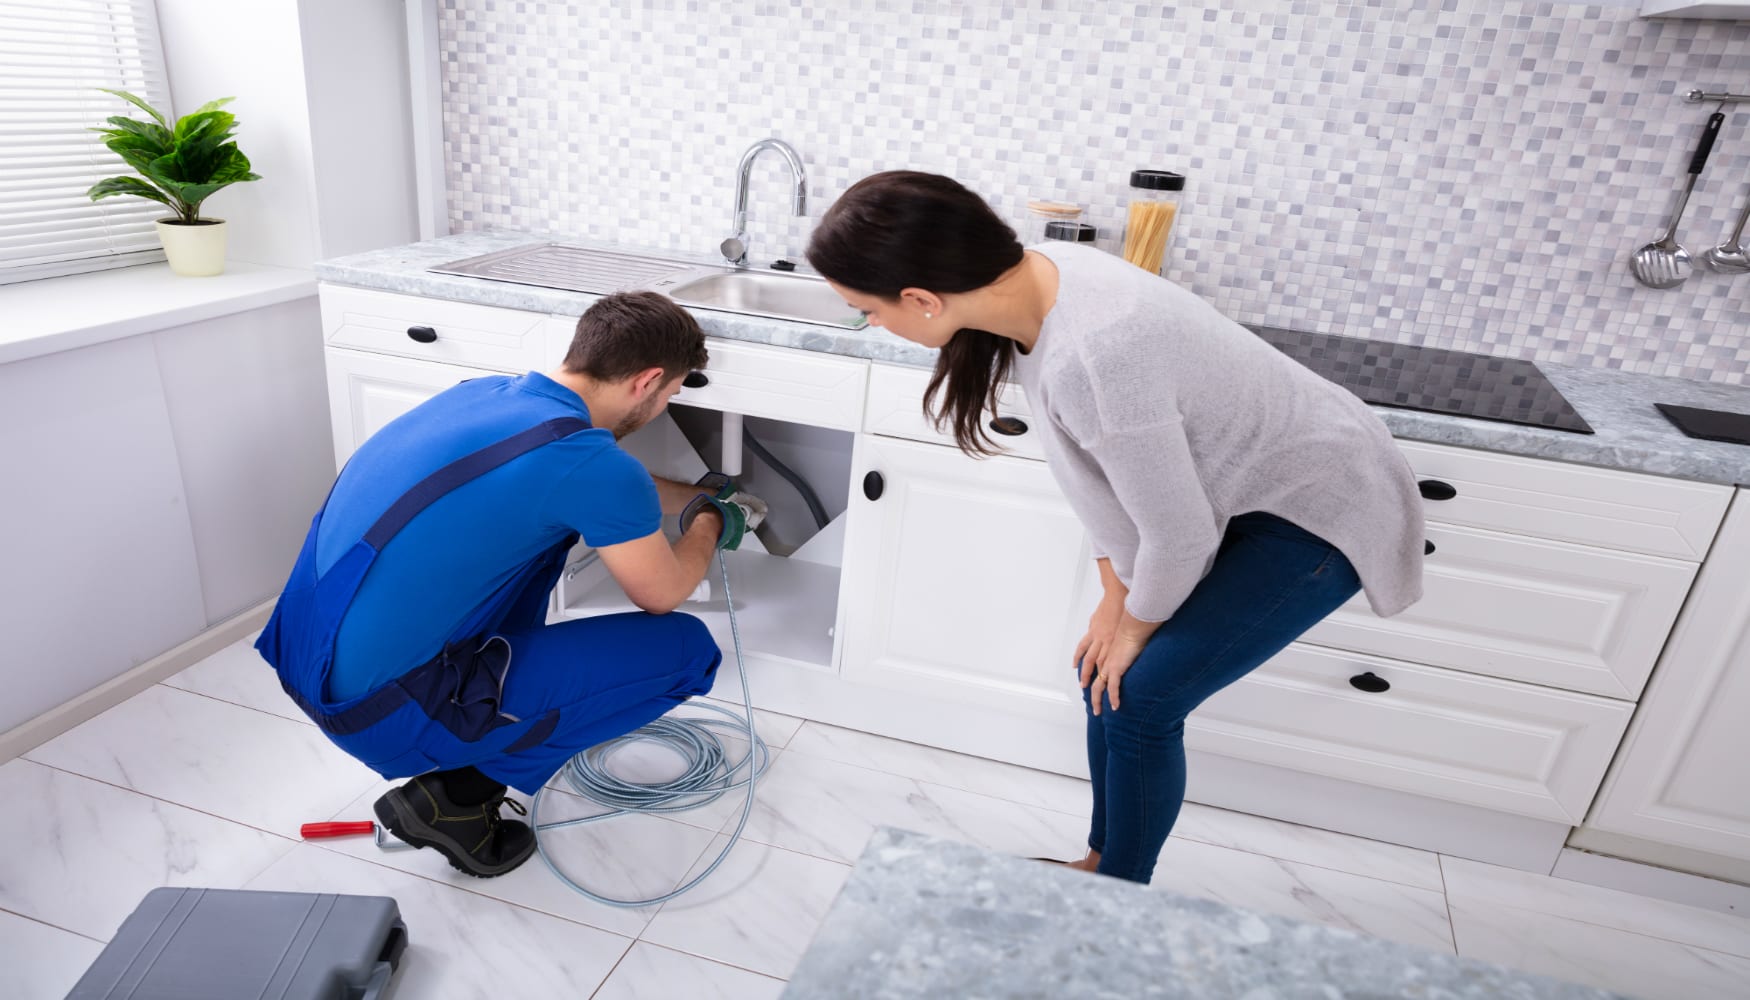 How To Get The Plumbing Assistance You Need